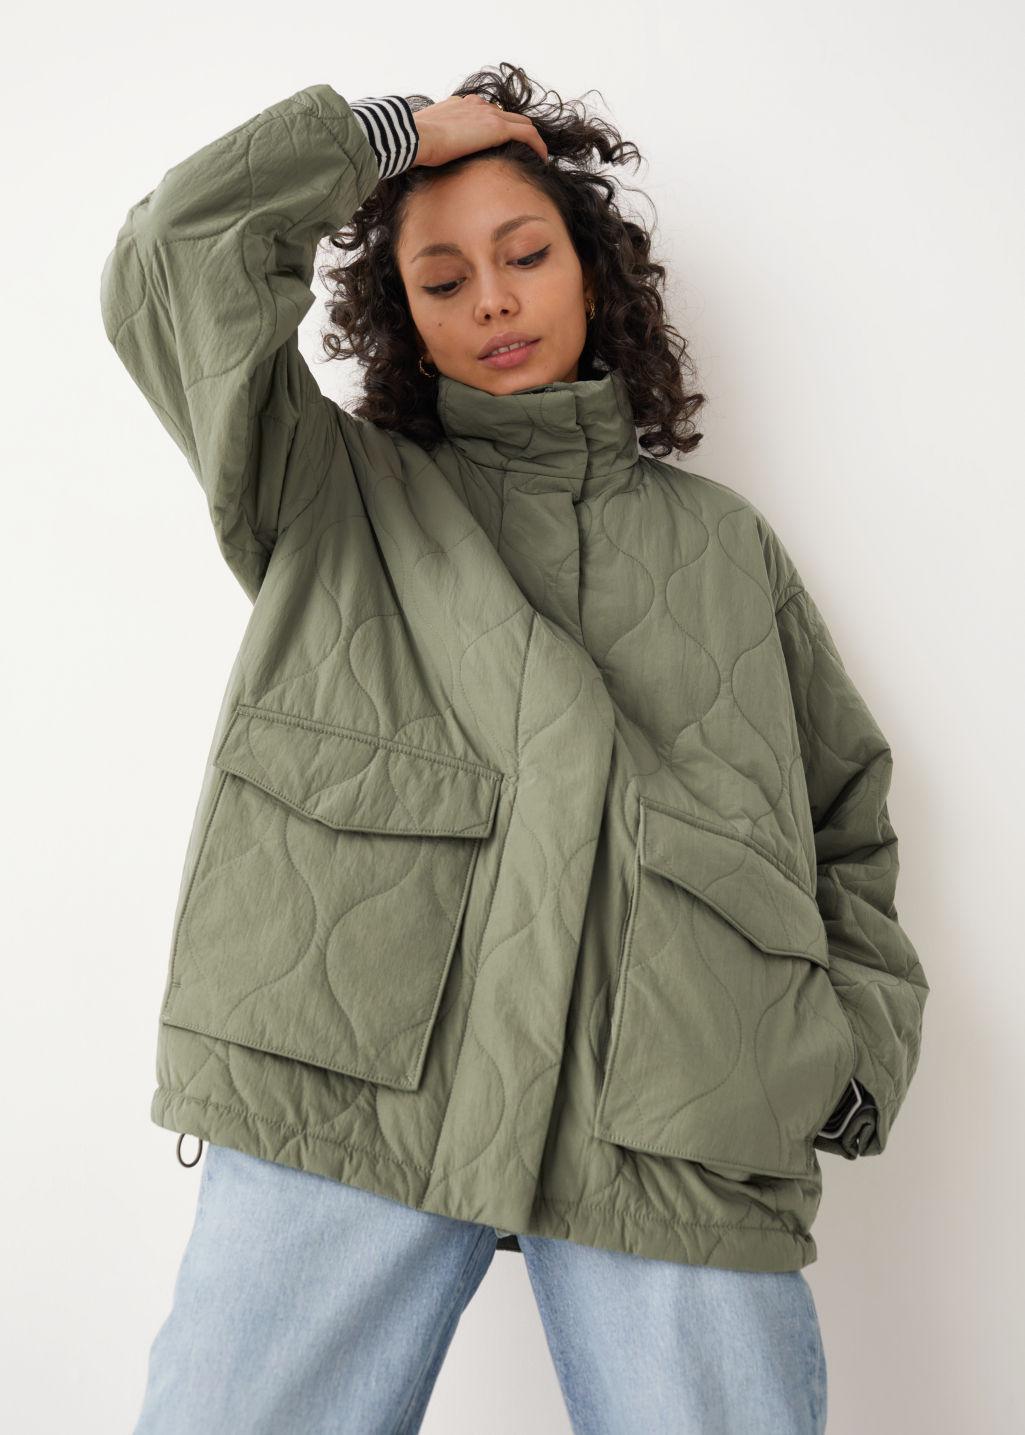 & Other Stories Oversized Quilted Zip Jacket in Green | Lyst